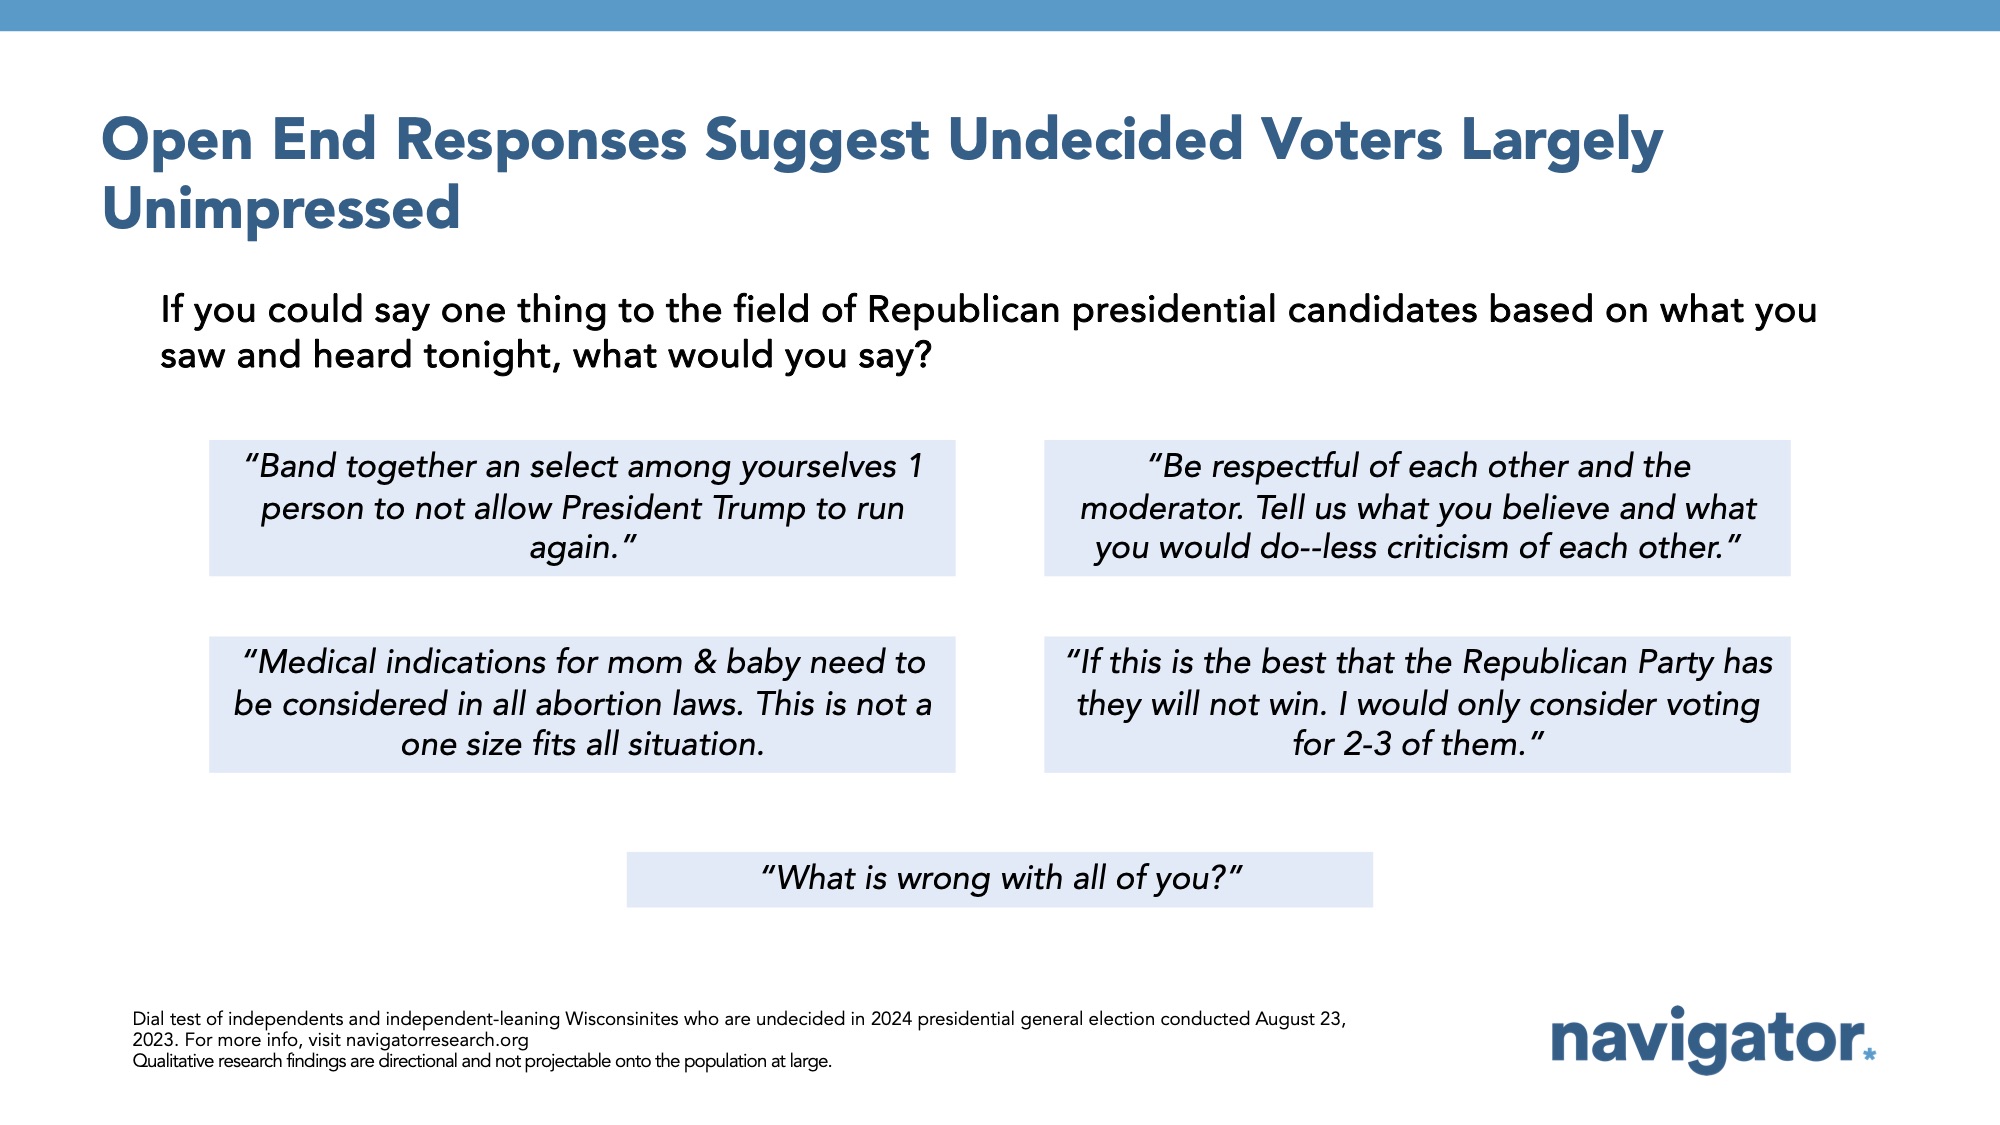 Dial group report slide titled: Open End Responses Suggest Undecided Voters Largely Unimpressed